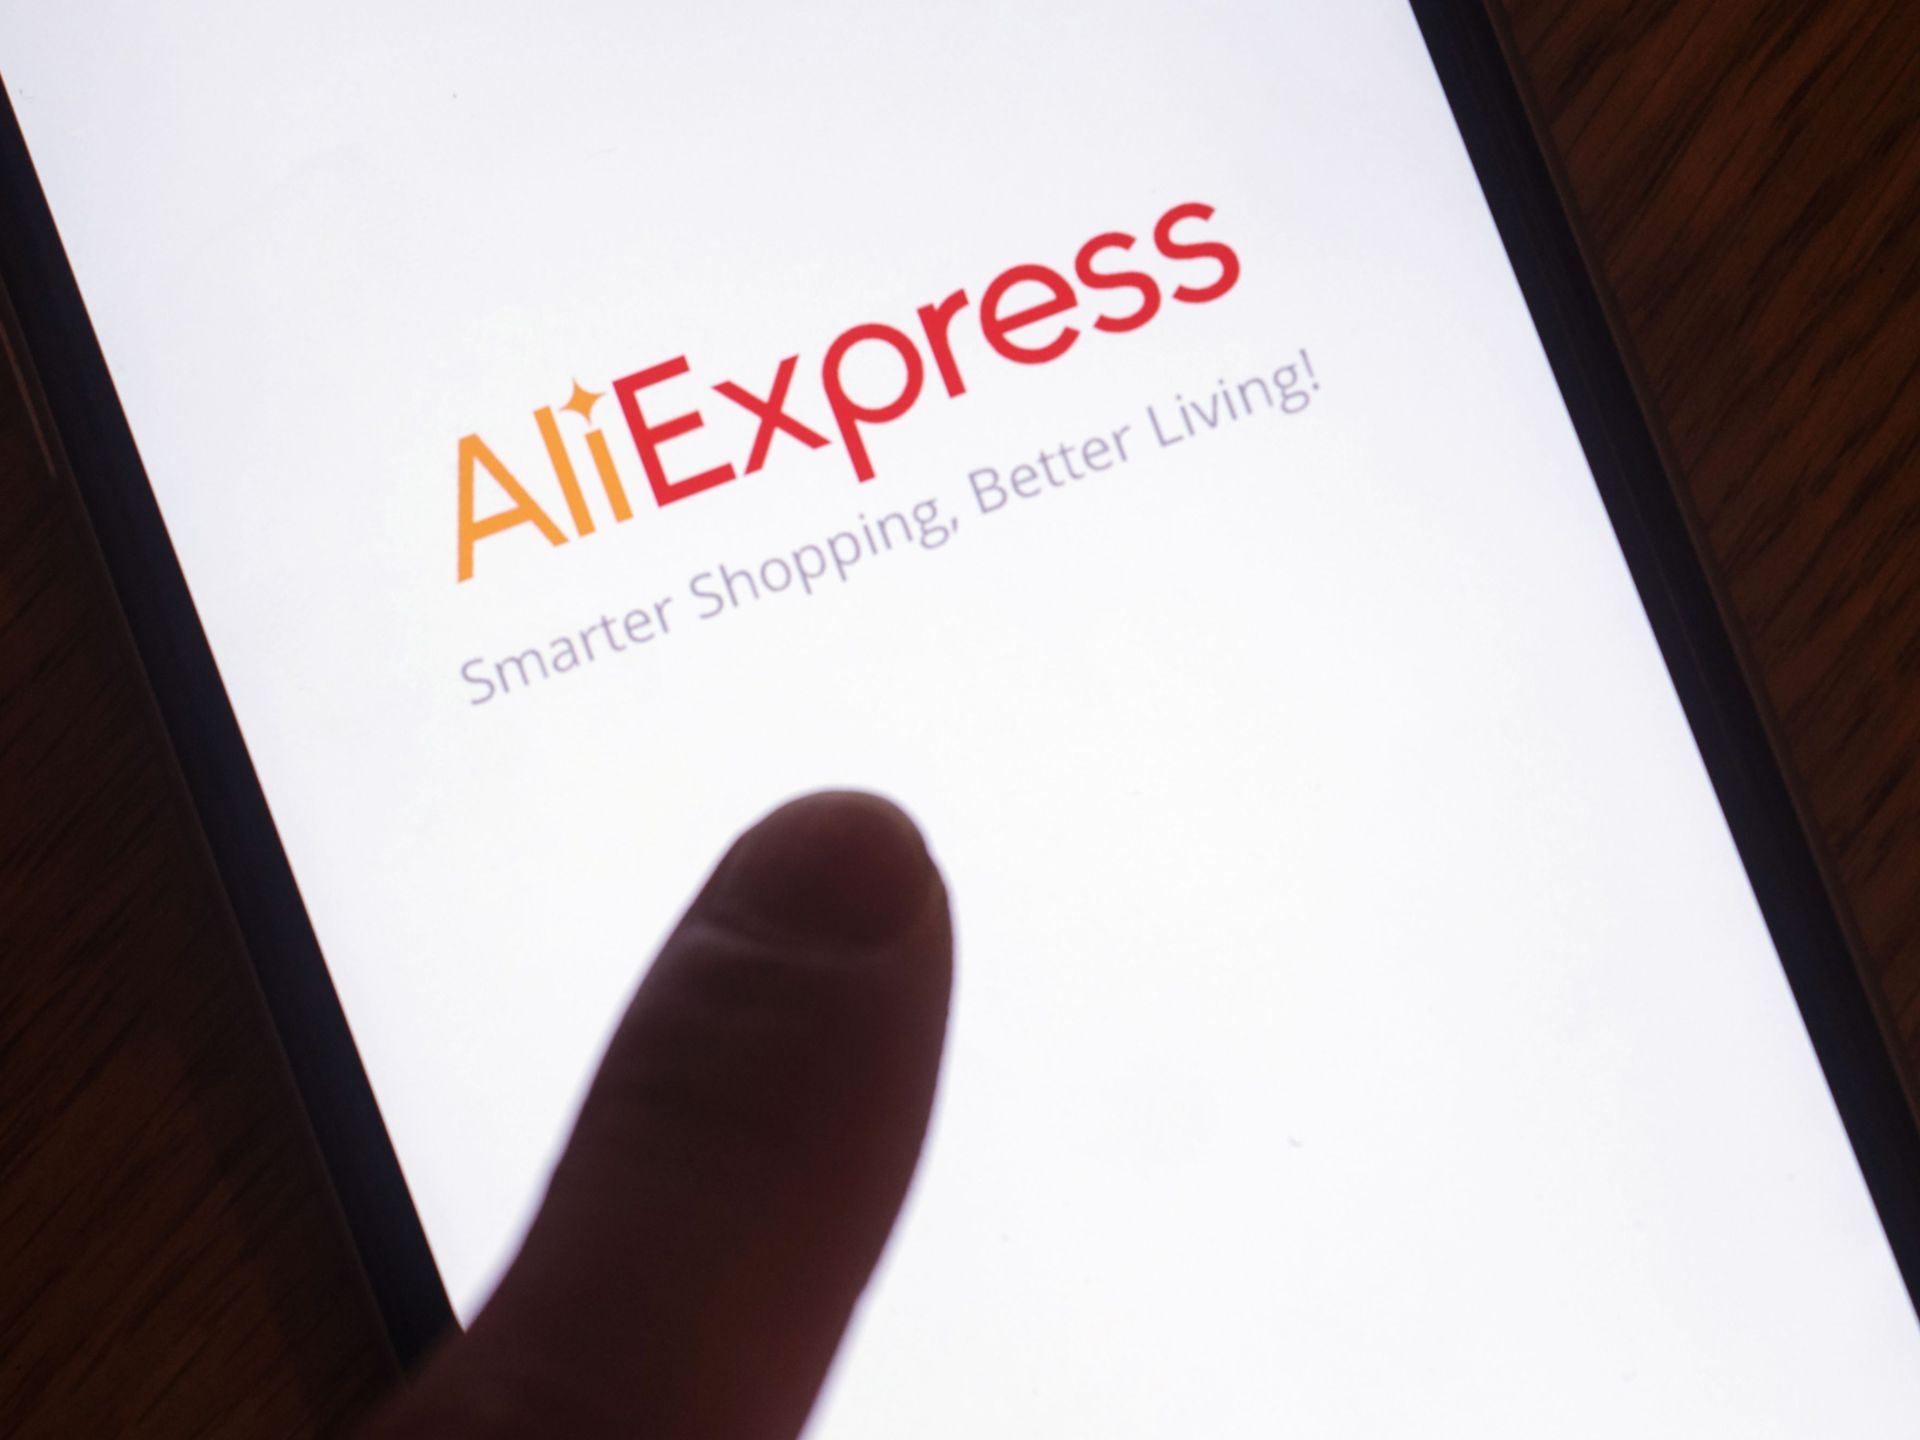 EU probes Chinese site AliExpress over potentially illegal online products | Technology News [Video]